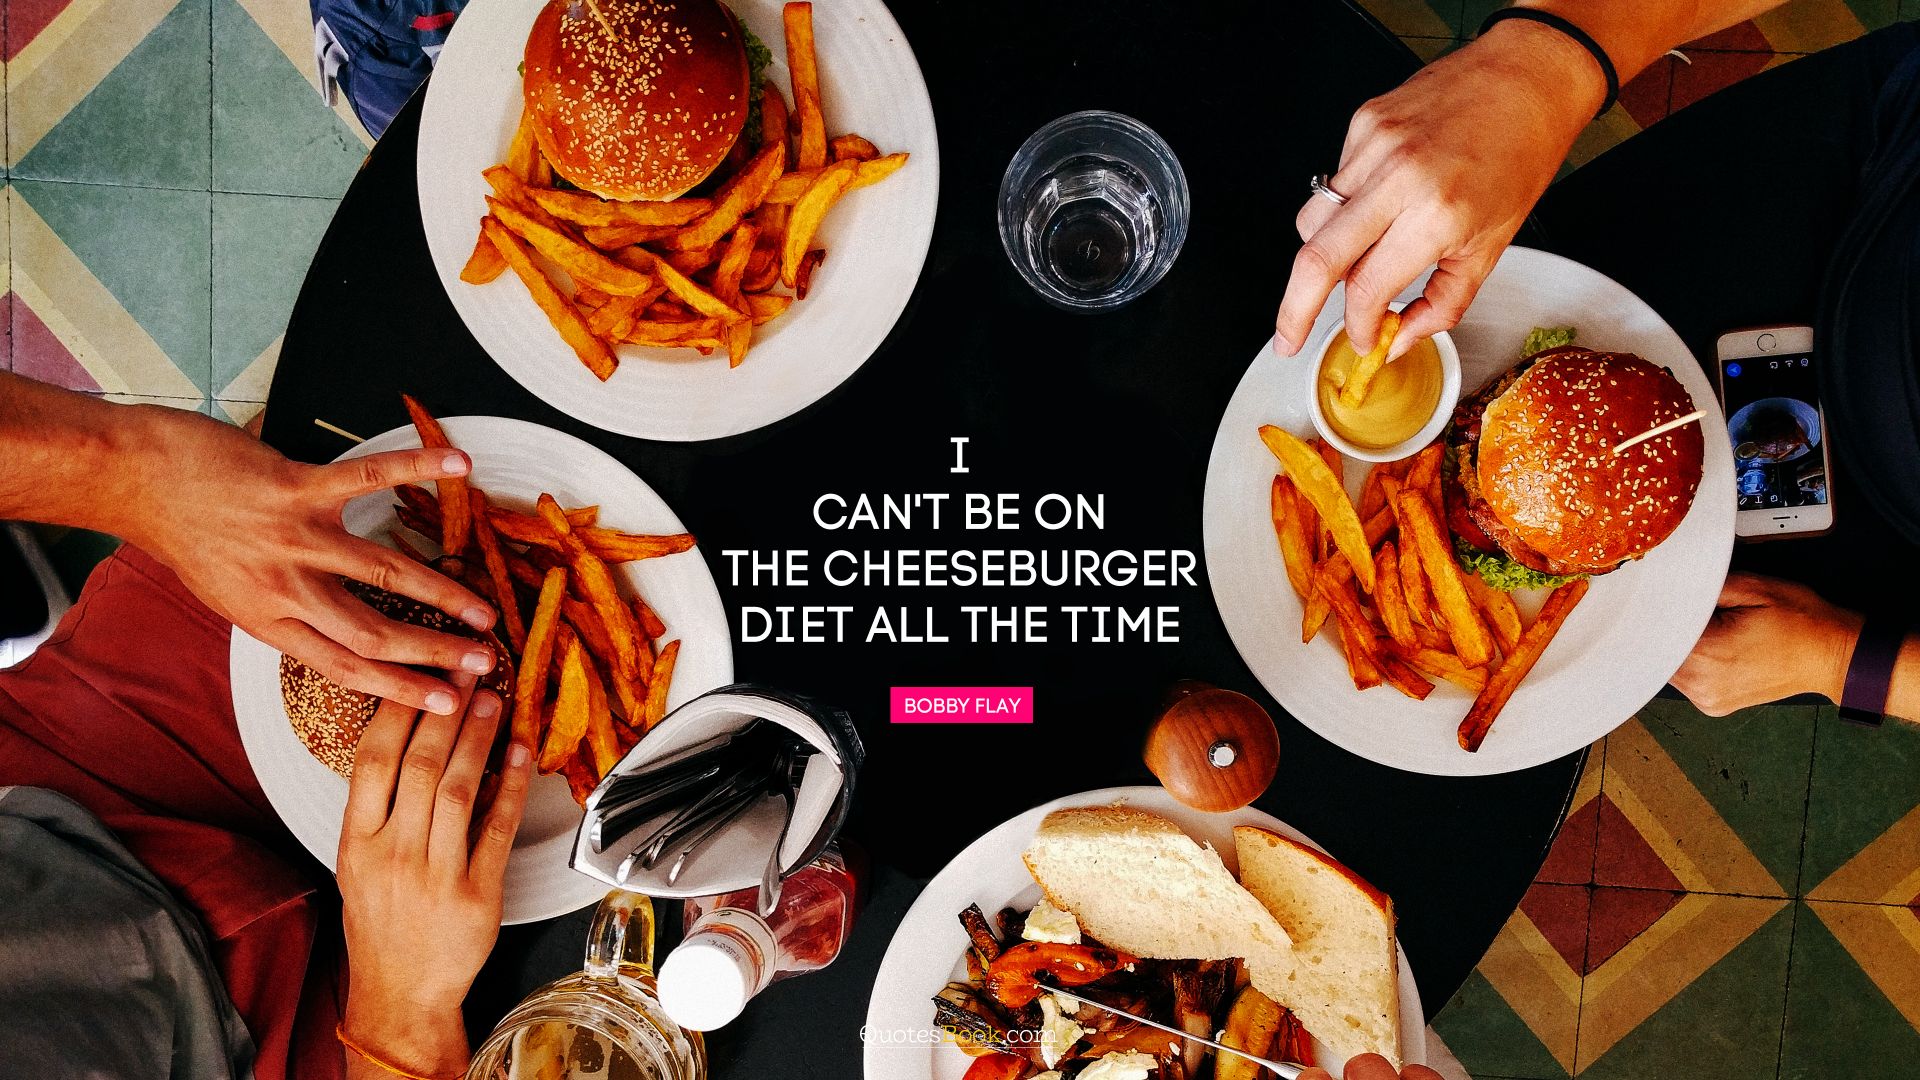 I can't be on the cheeseburger diet all the time
. - Quote by Bobby Flay